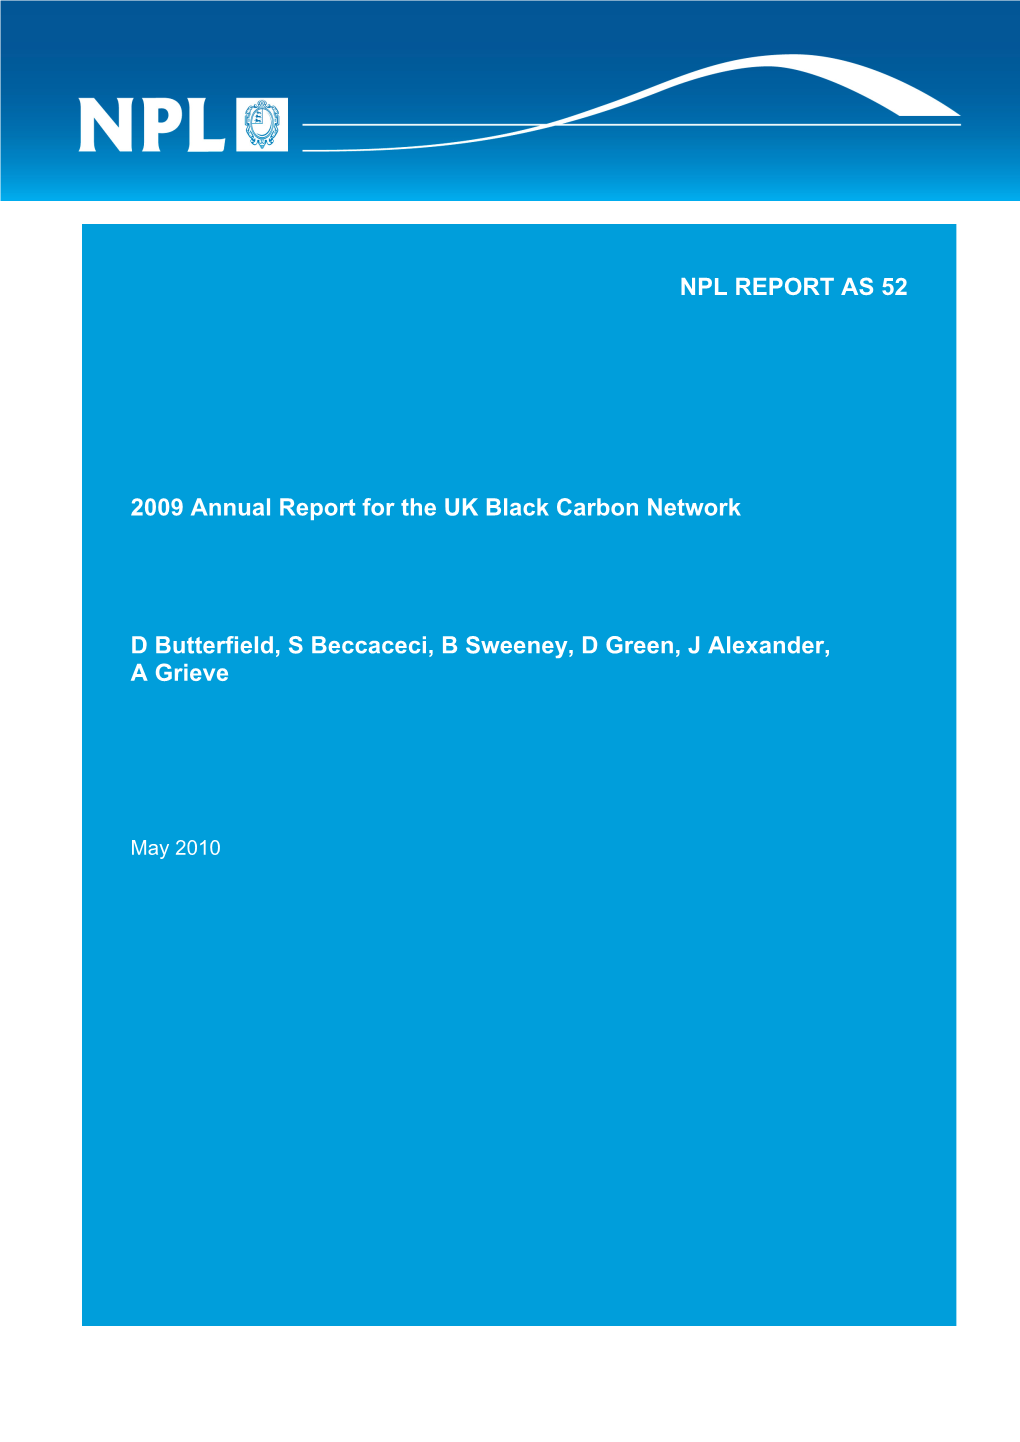 NPL REPORT AS 52 2009 Annual Report for the UK Black